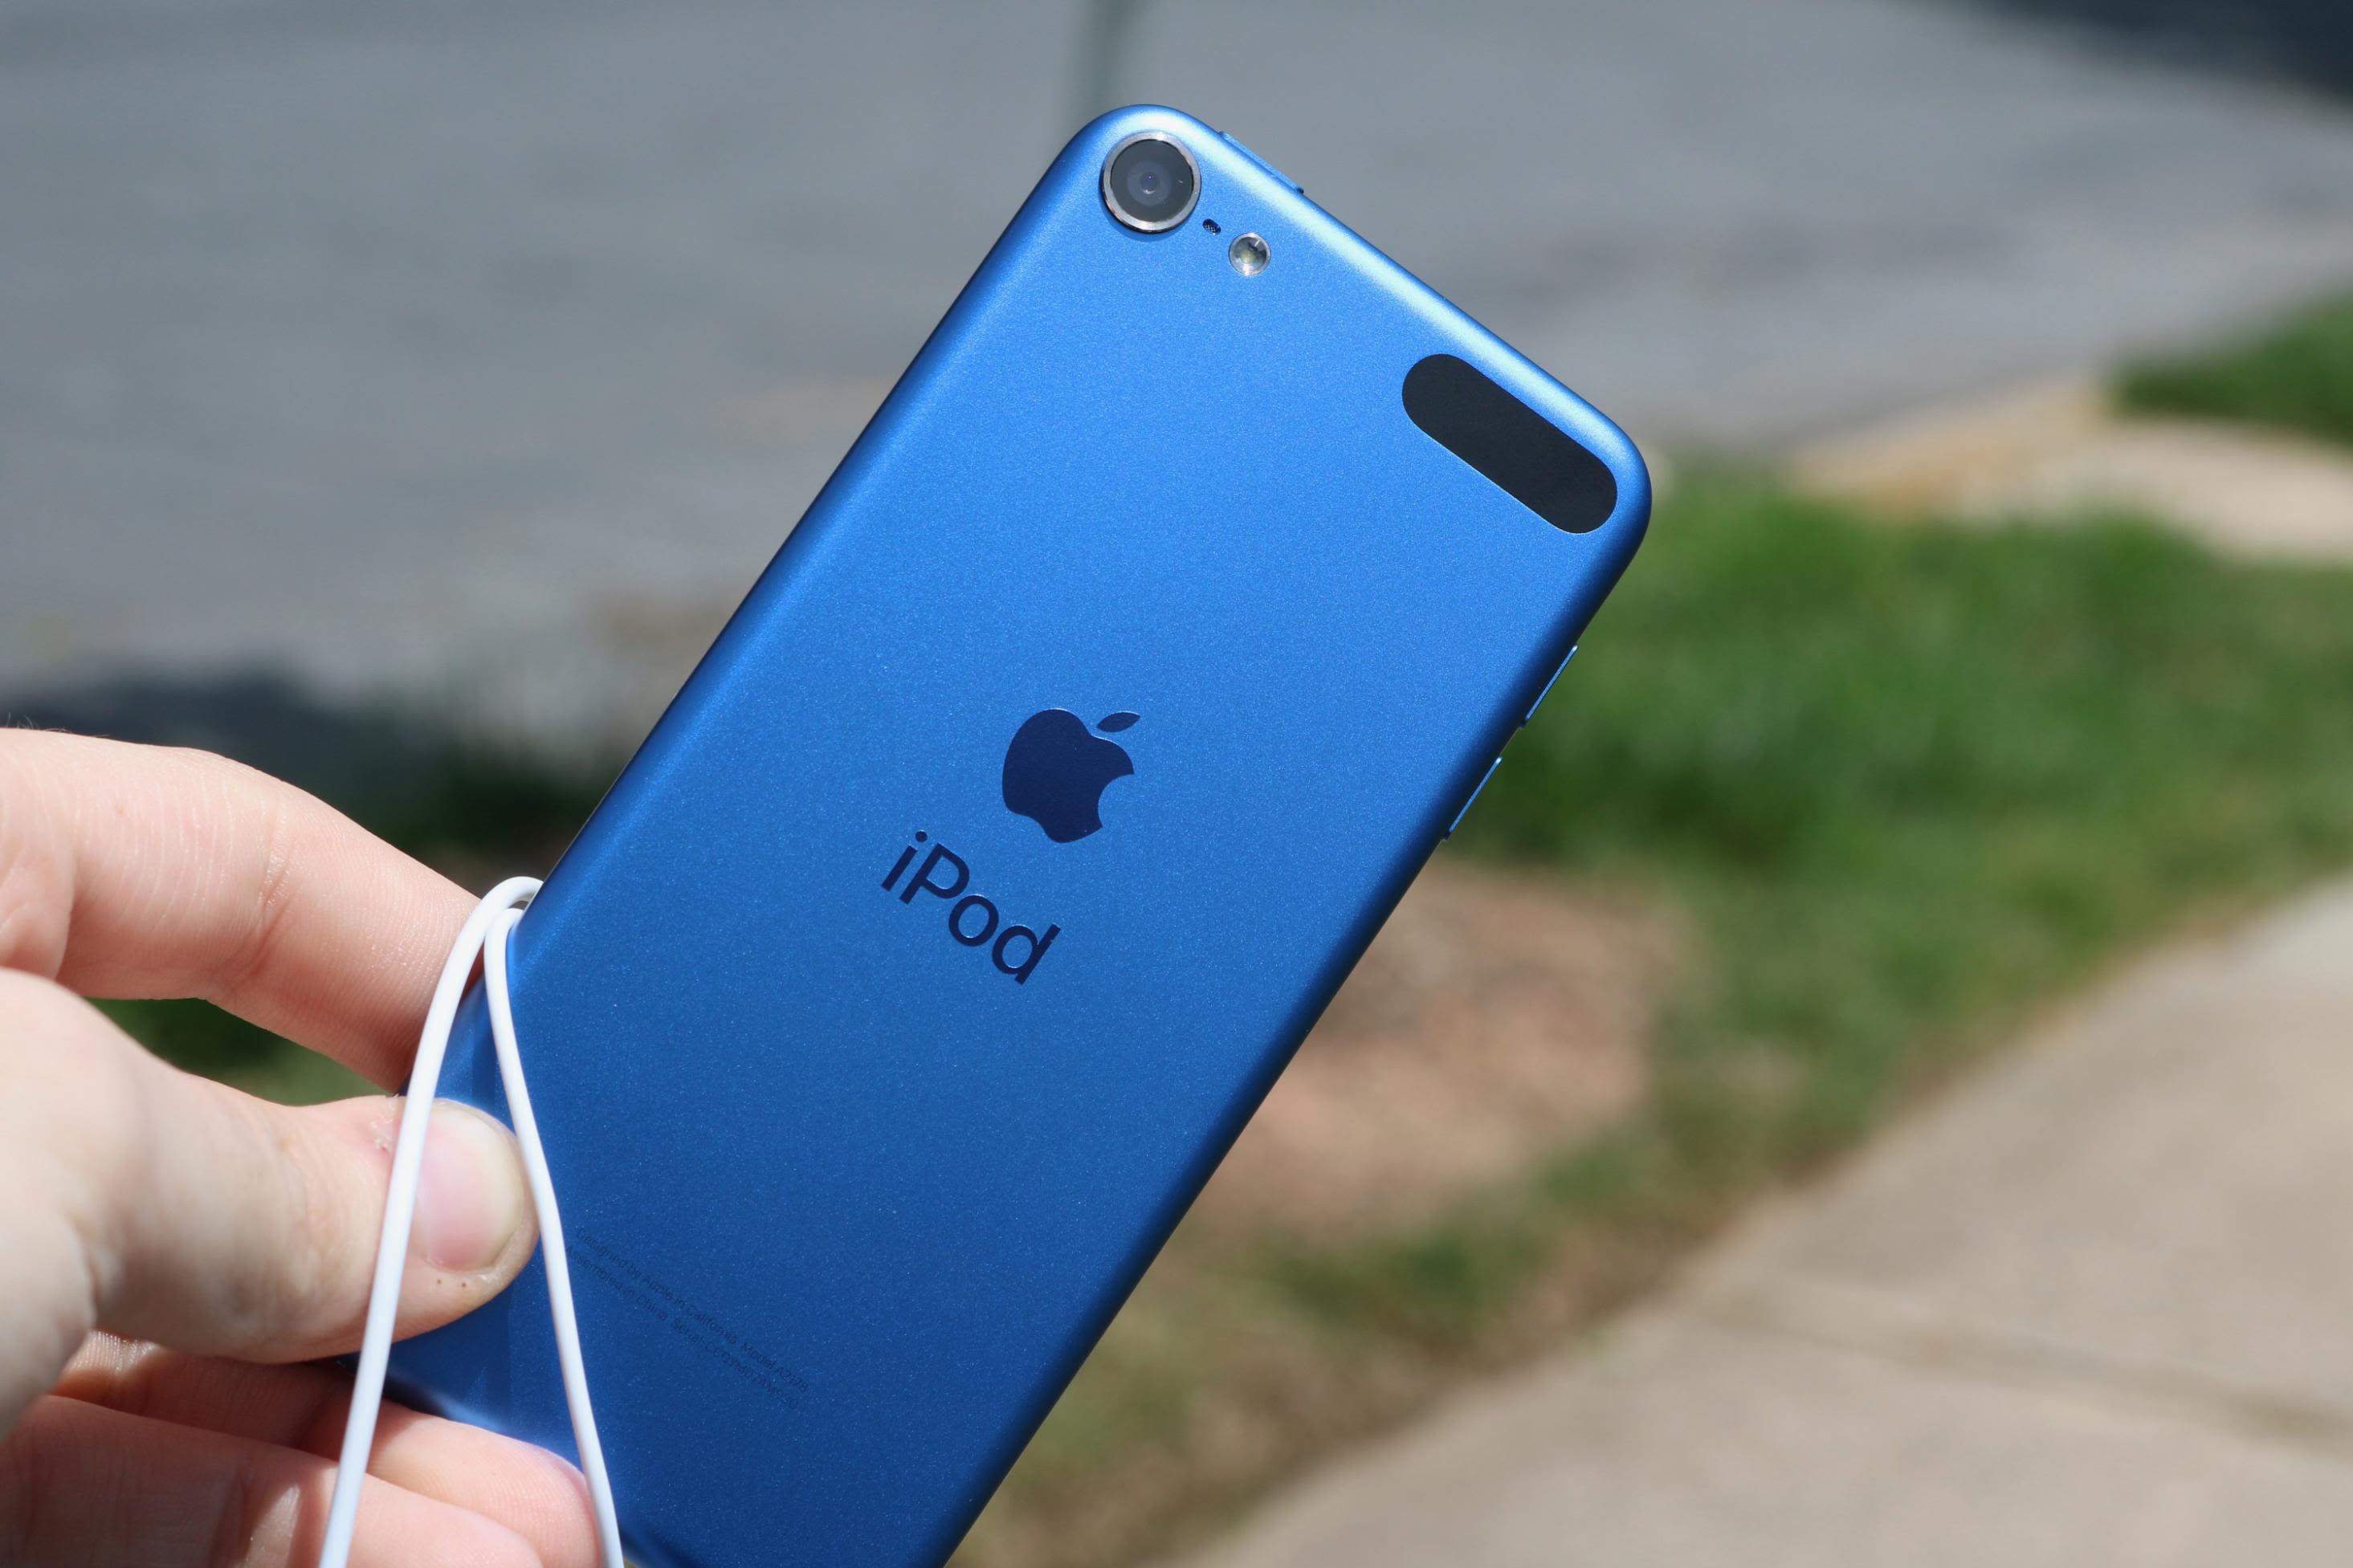 Review: Apple iPod touch (8GB/16GB/32GB)